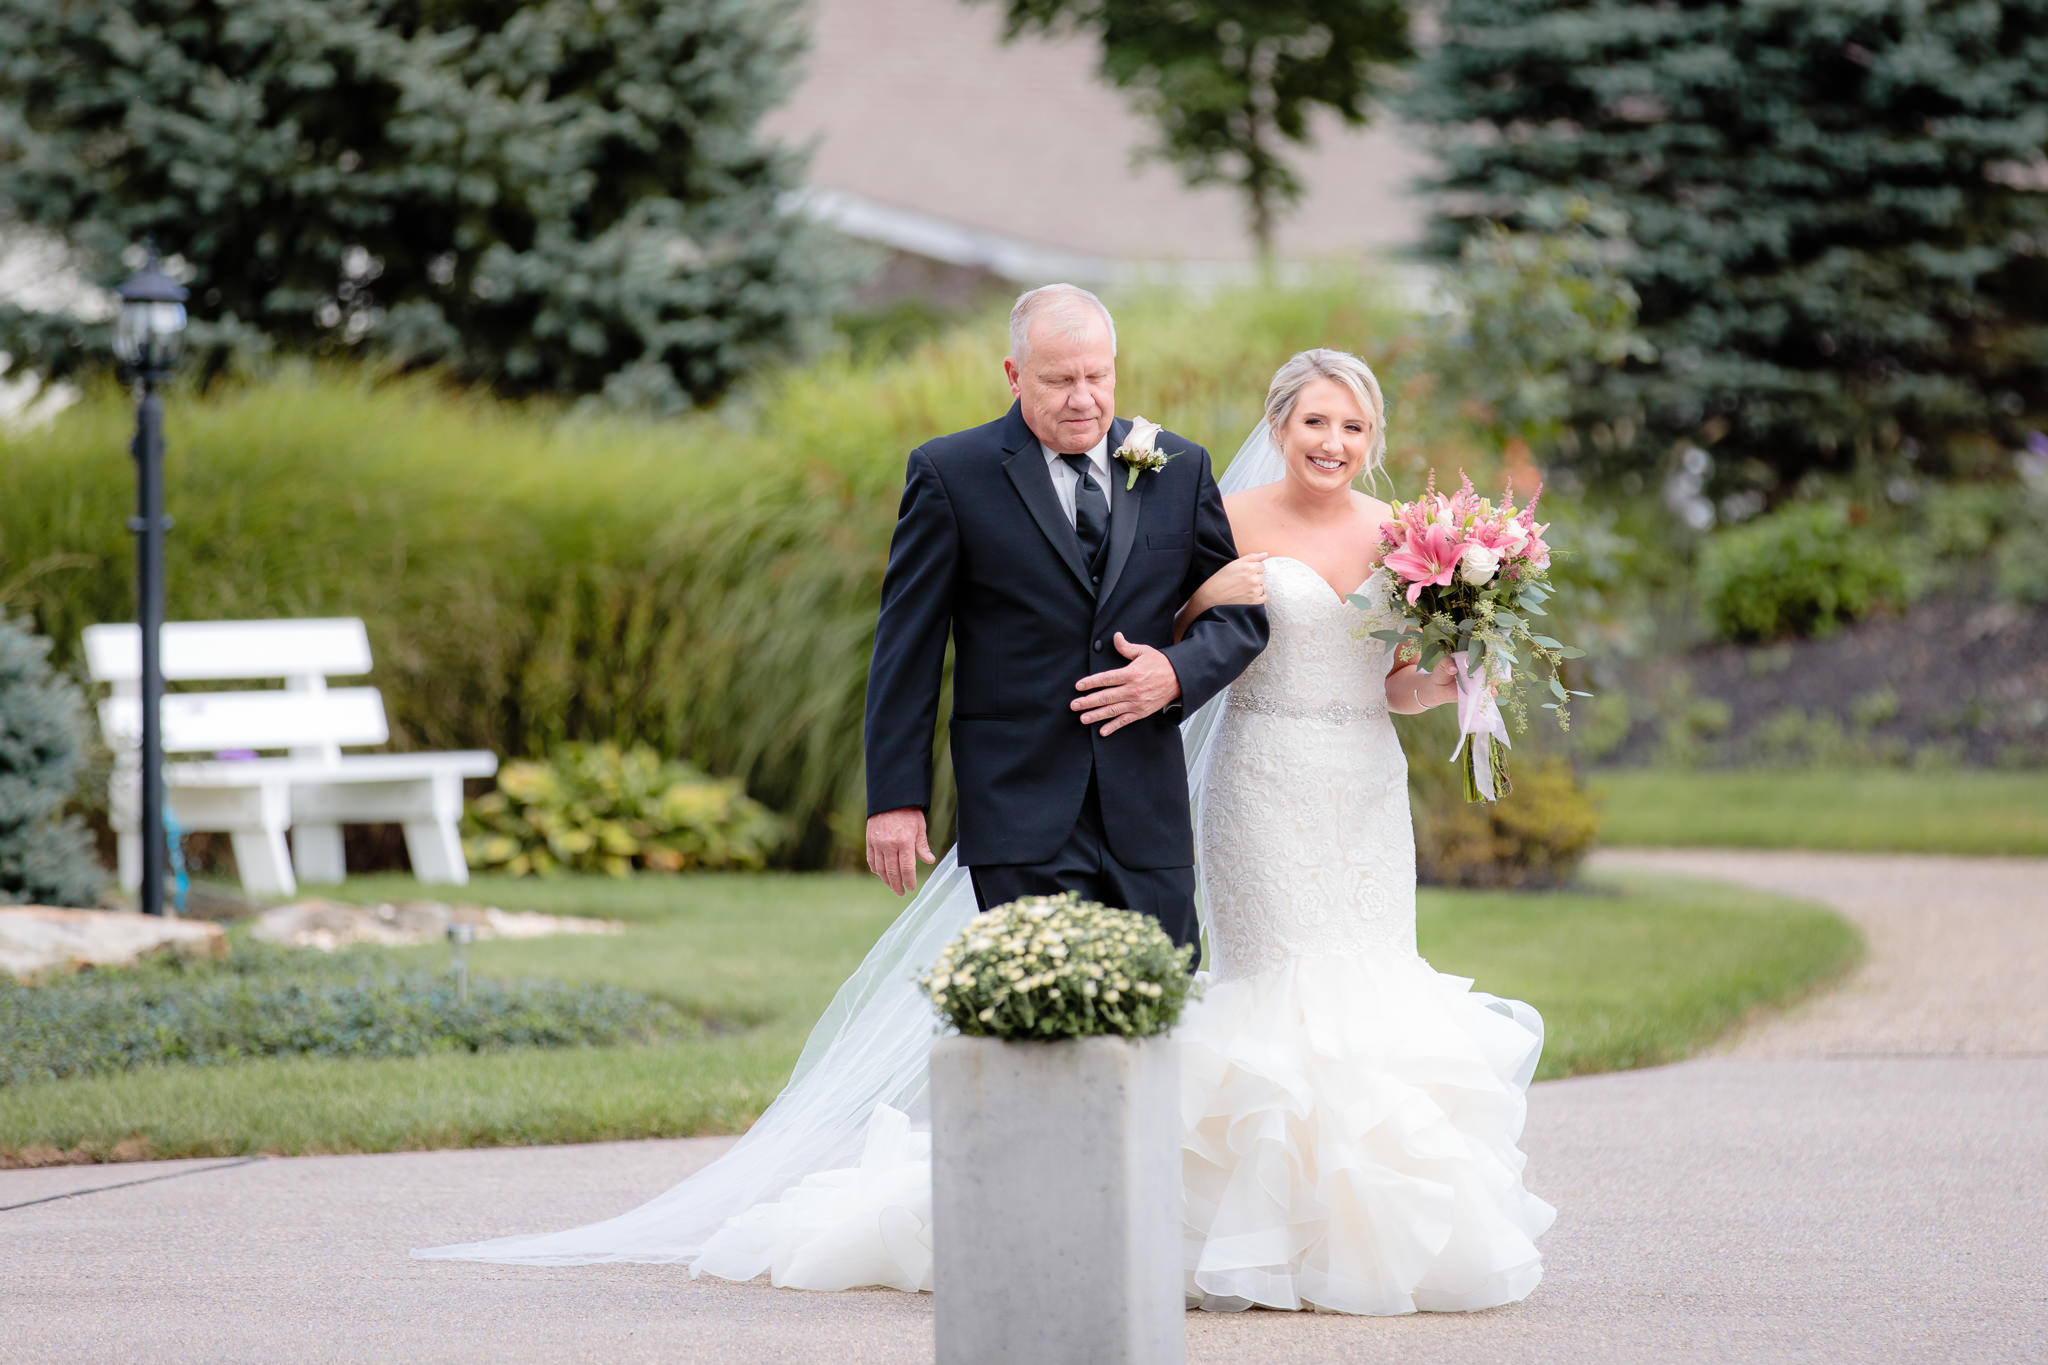 Father of the bride walks her to her outdoor ceremony at Greystone Fields